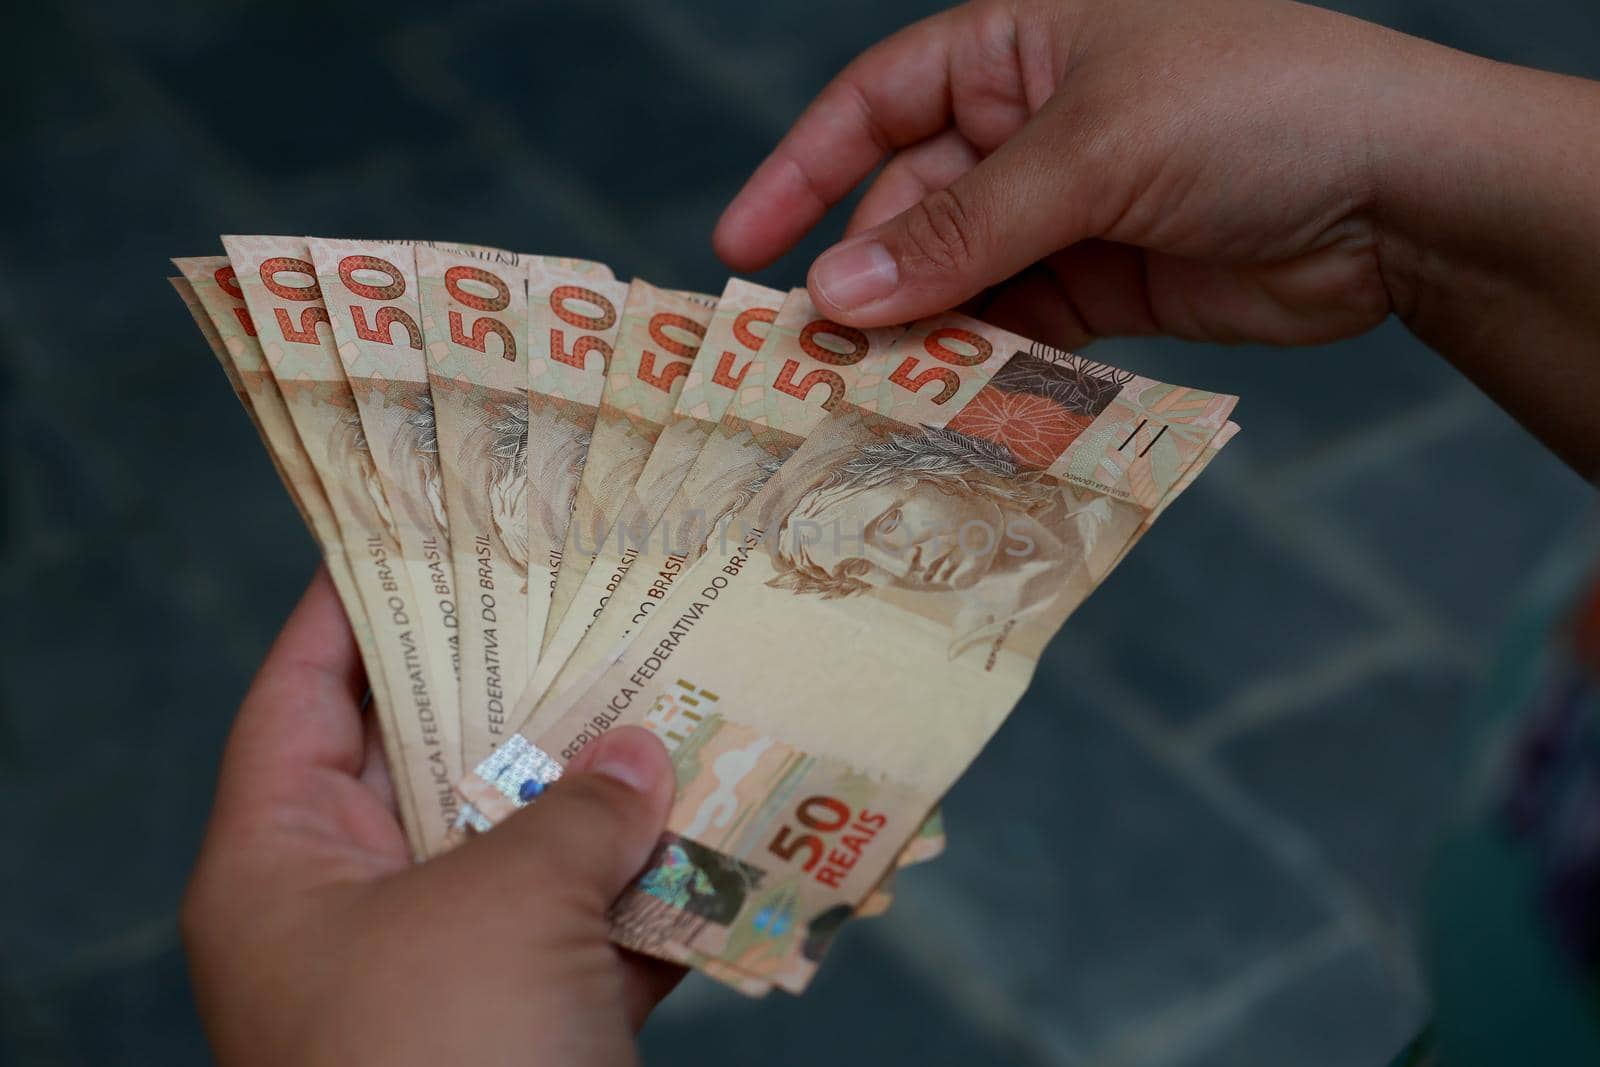 salvador, bahia / brazil - february 25, 2015: hands hold fifty reais (R $ 50.00) bills in the city of Salvador.




